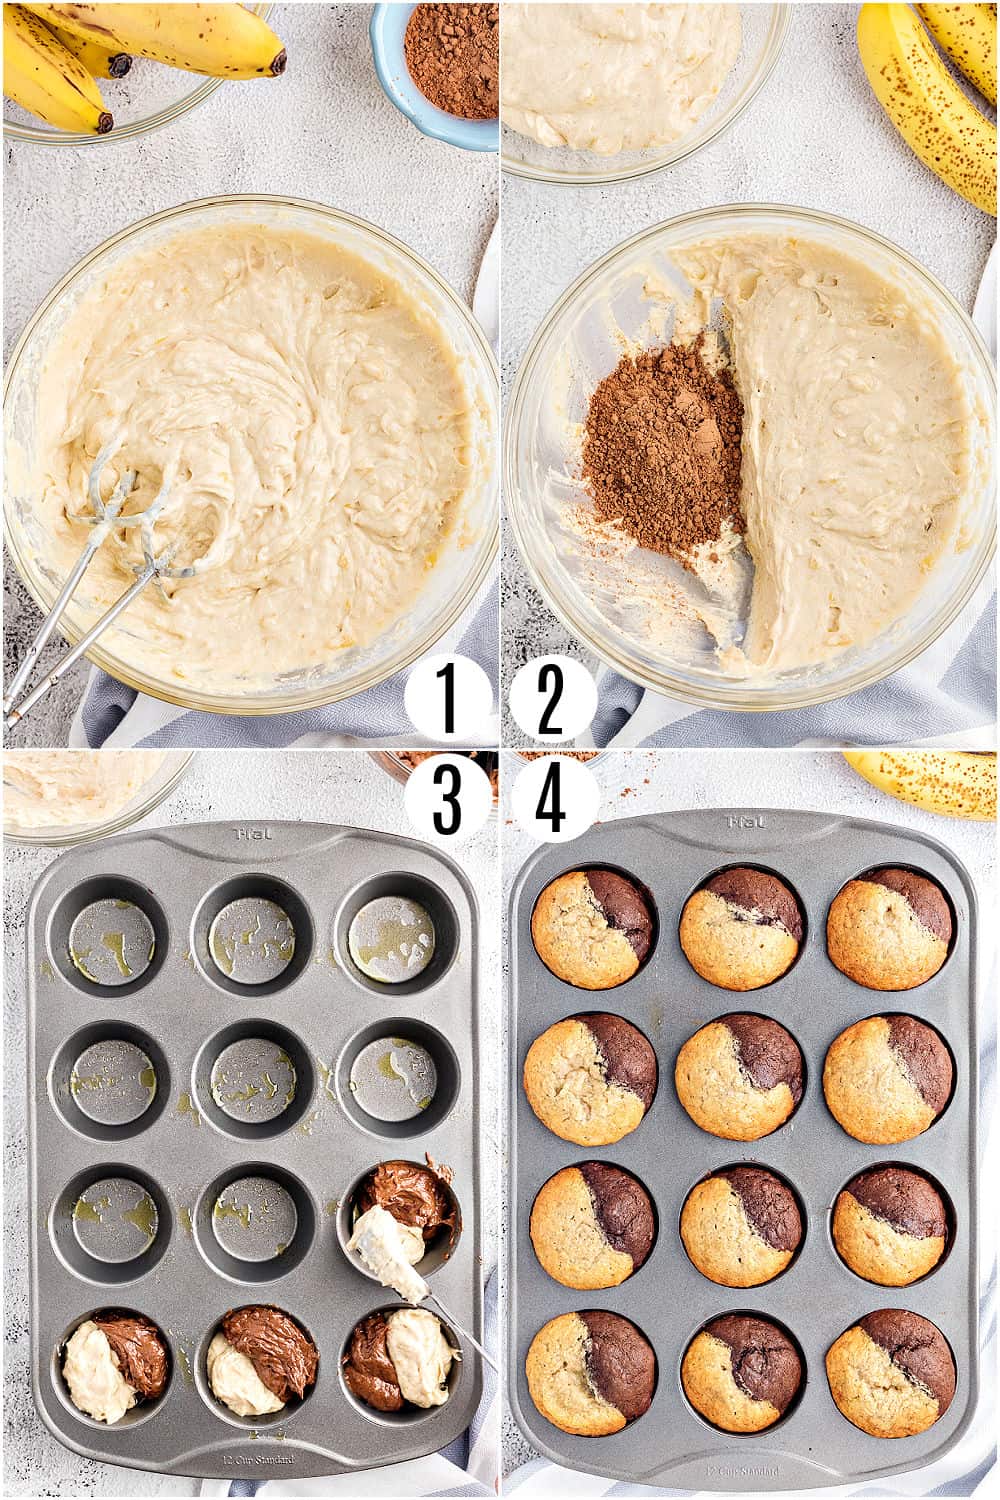 Step by step photos showing how to make chocolate banana muffins.